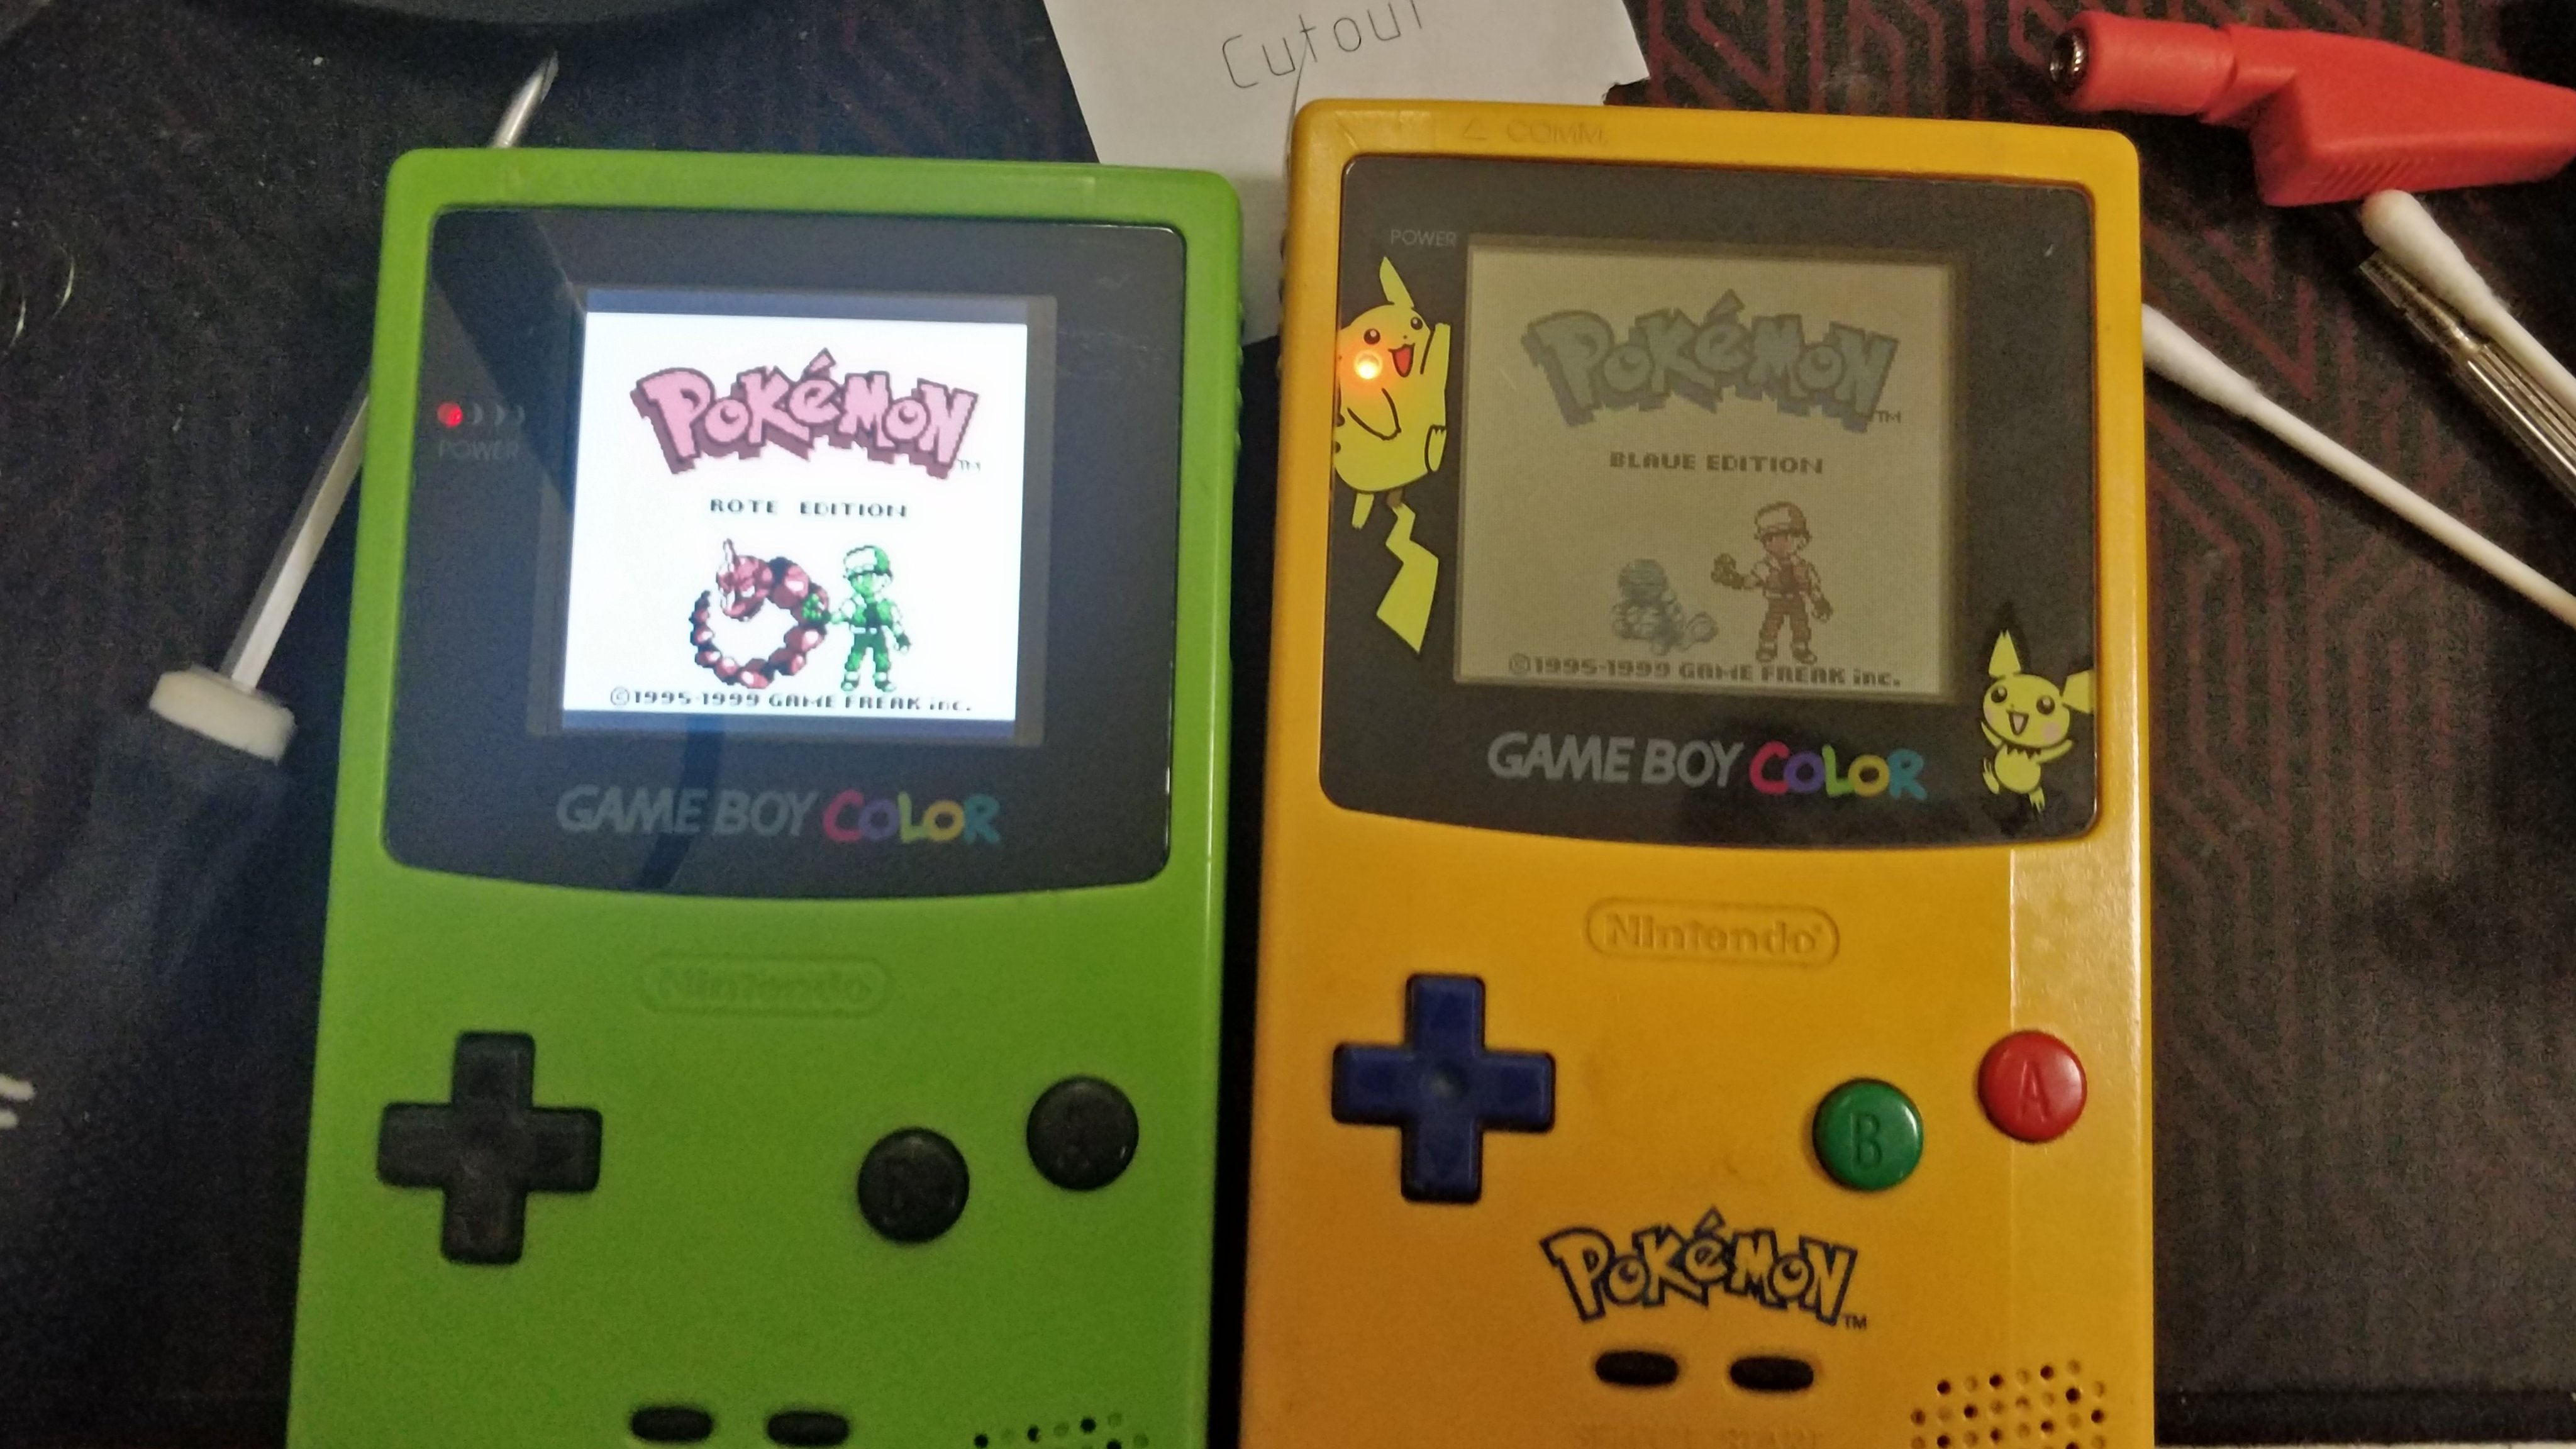 emen3y on Twitter: "GameBoy Color LCD from midwest embedded # GameBoyColor #mods https://t.co/fbg4d8U3tv" / Twitter